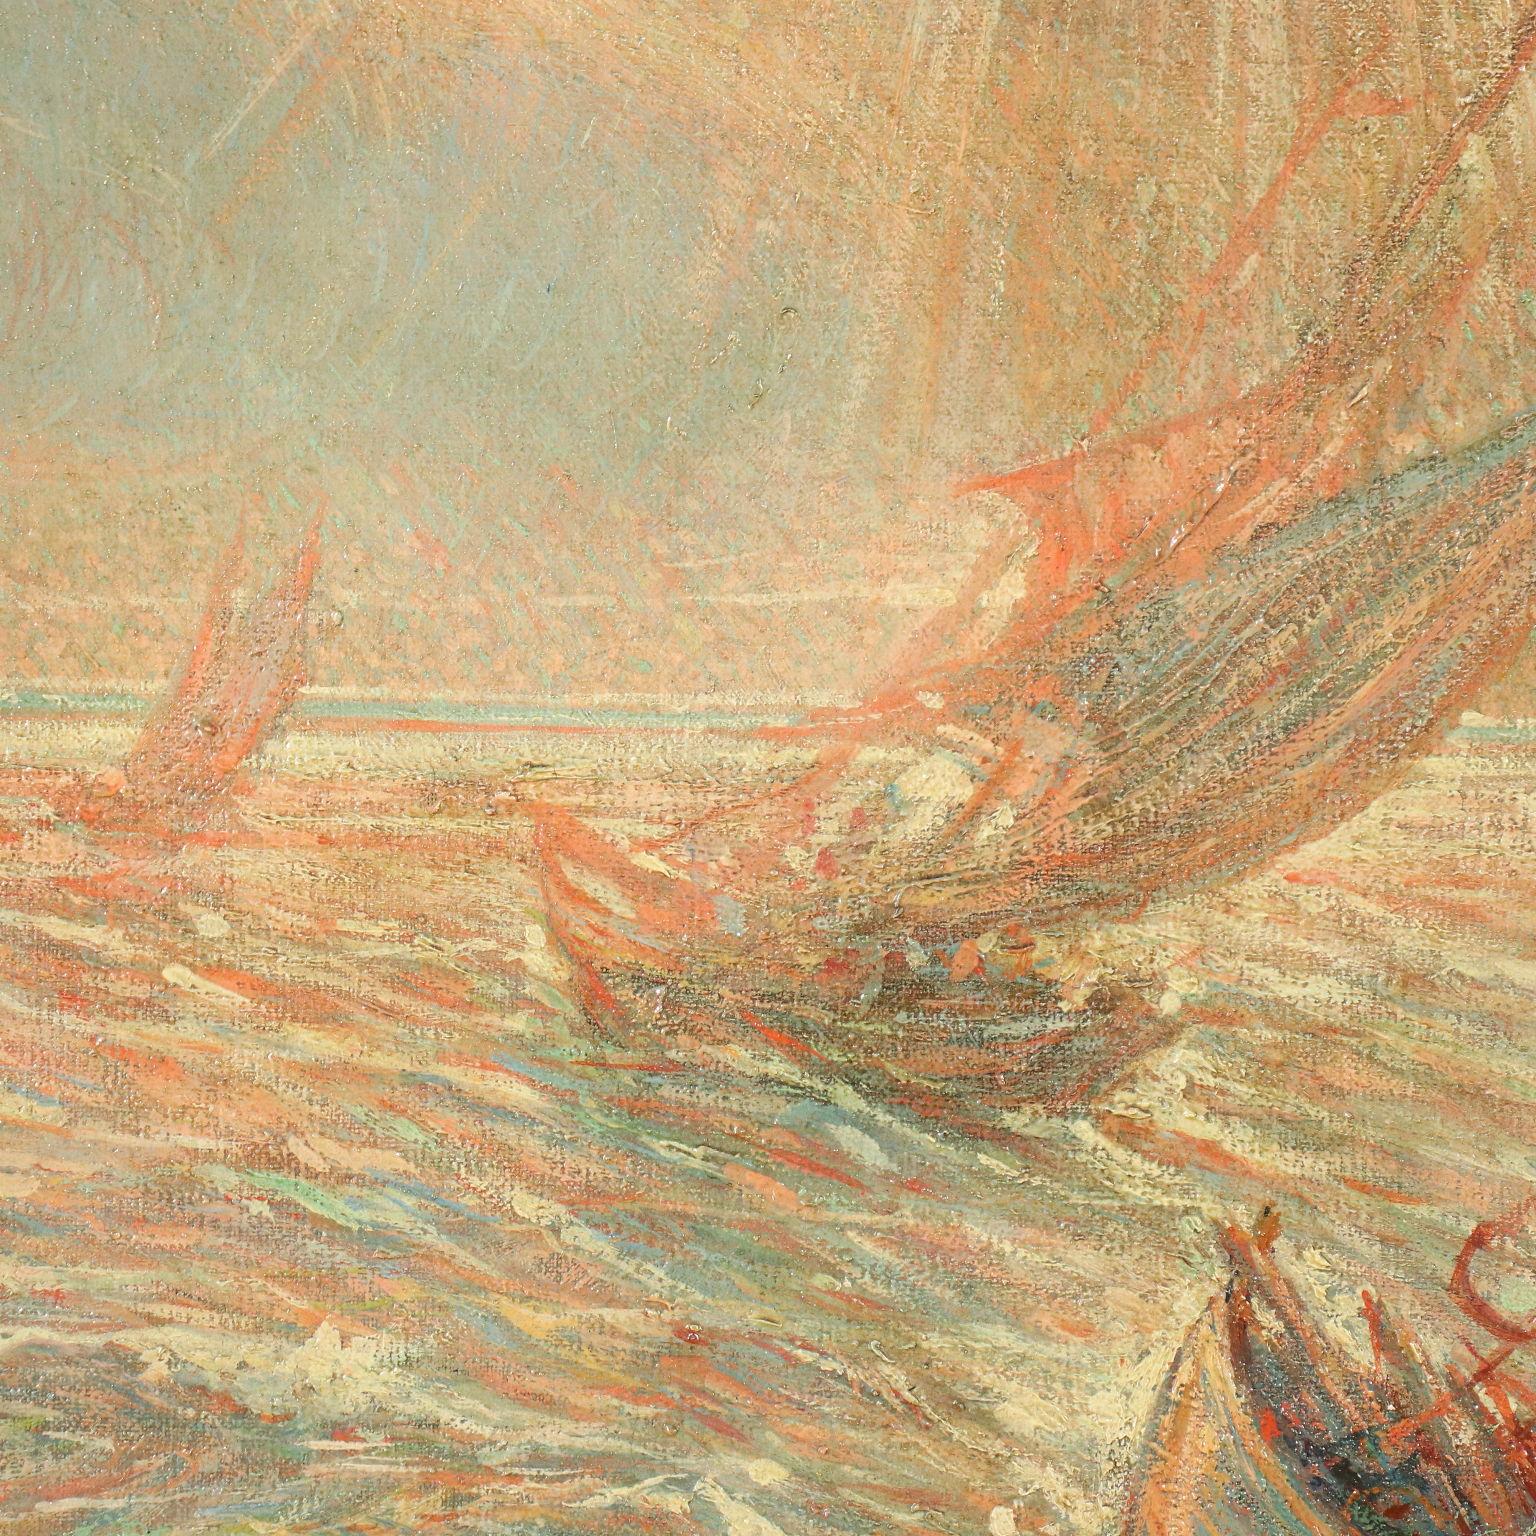 Oil on canvas. Unidentified signature and date lower right.
The painting, thanks to its size, has a great scenographic effect: in a rough sea, near the rocks that threateningly emerge from the waves, some fishing boats are fighting for survival;